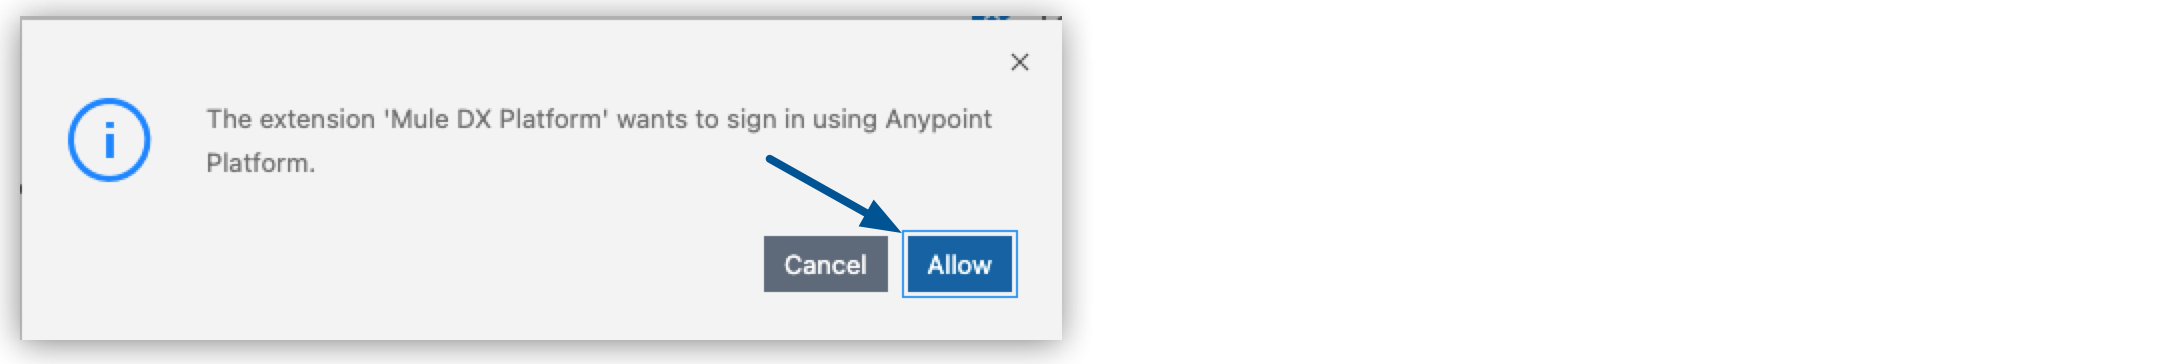 allow login to anypoint platform